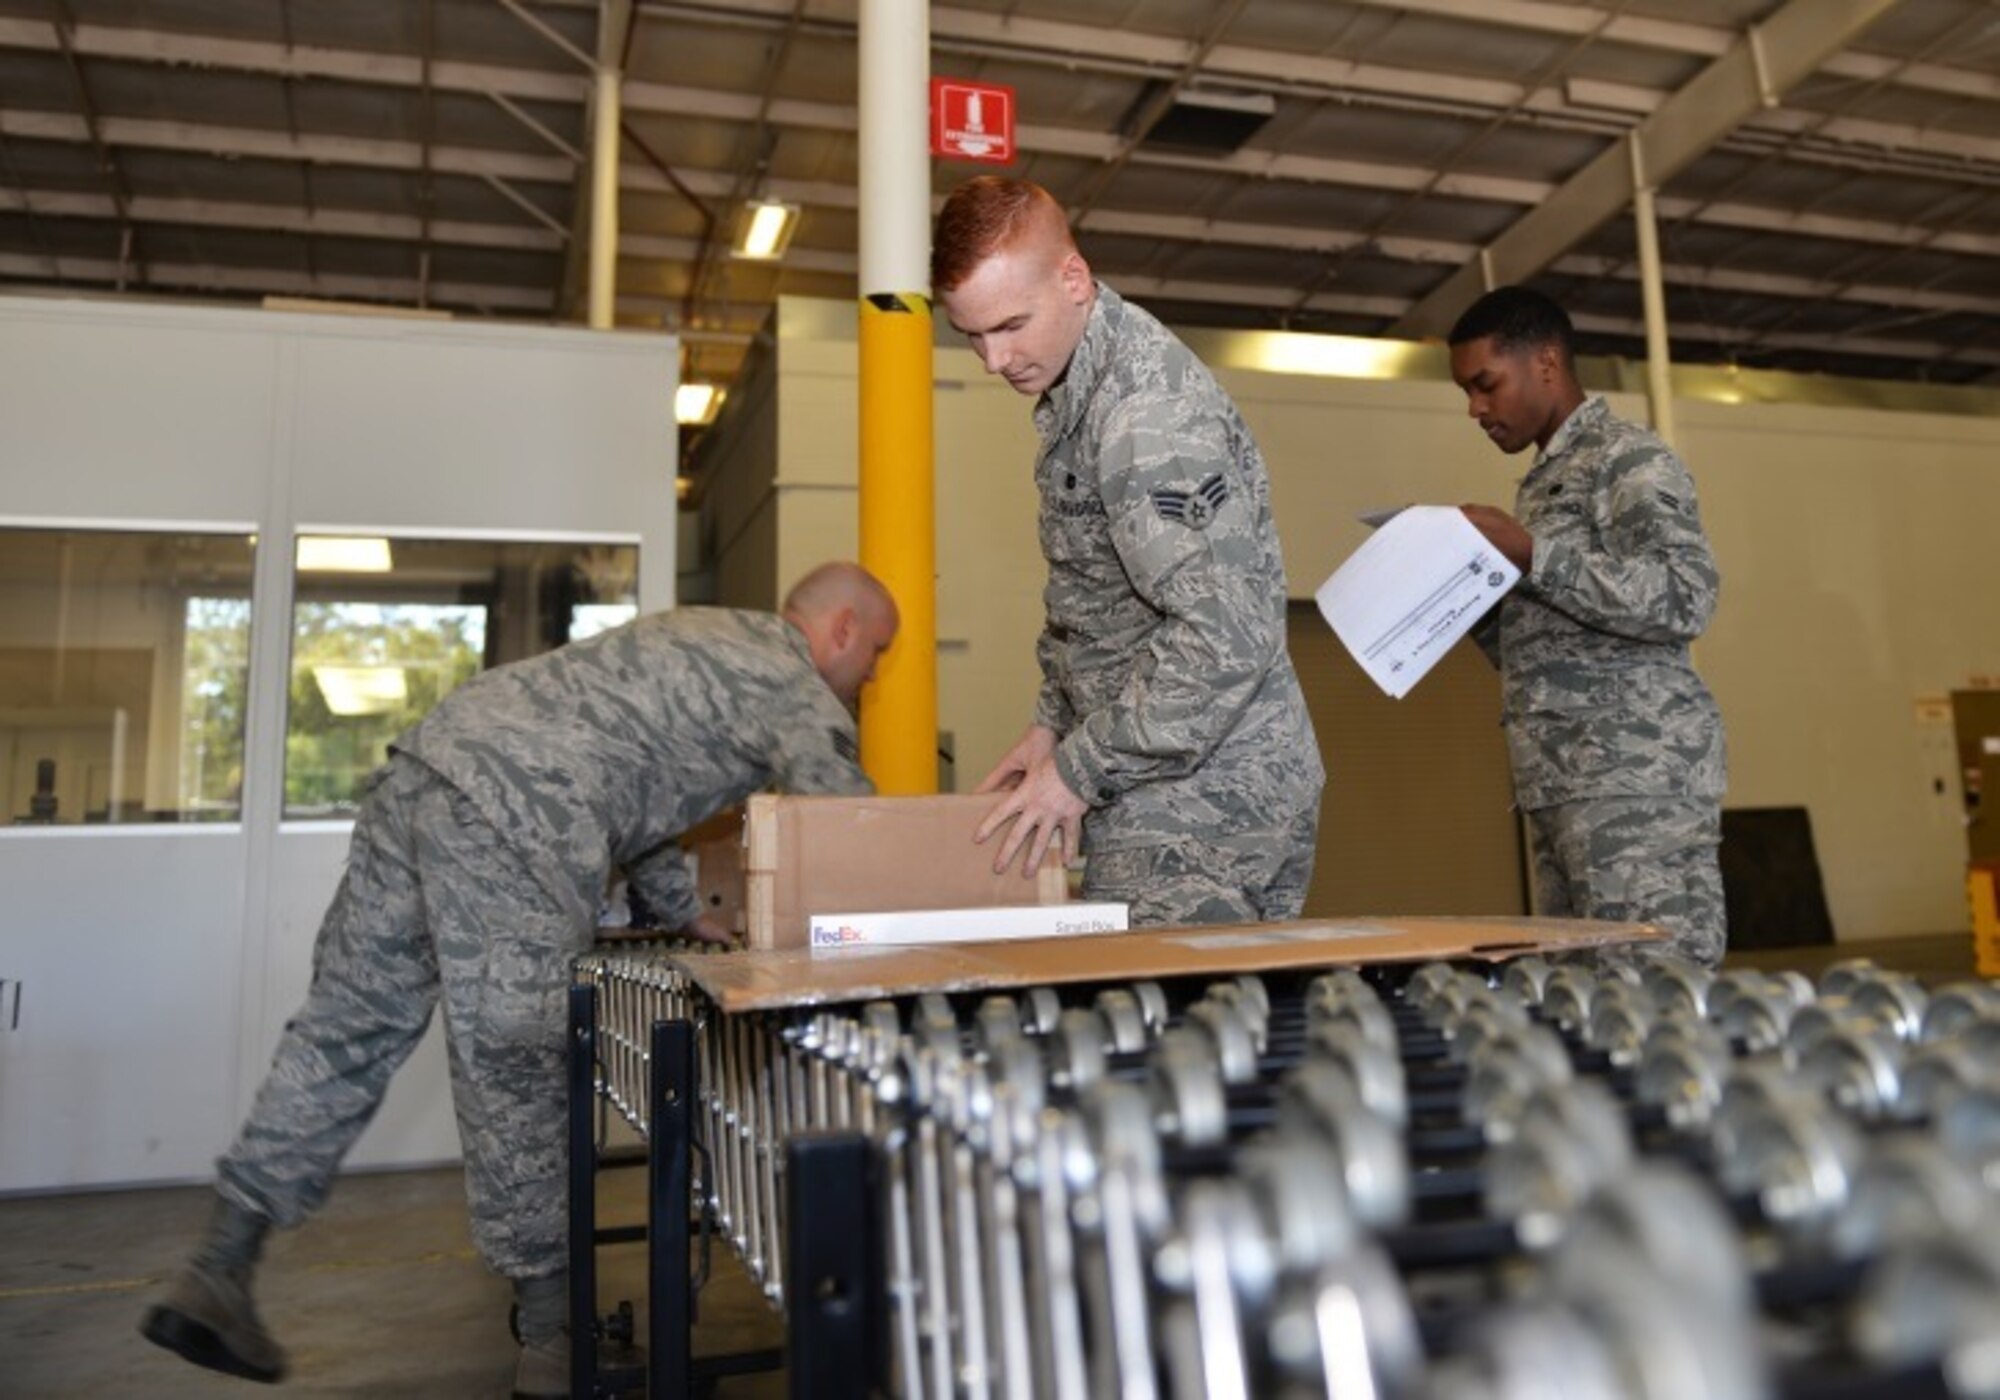 Airmen of the 96th Logistics Readiness Squadron process equipment and supplies for the F-35A and C variants for delivery at Eglin Air Force Base, Fla., Oct. 15, 2015. Materiel management Airmen prioritize equipment deliveries to help keep the 33rd Fighter Wing student pilots in the air and the 5th generation fighter moving forward to initial operational capabilities. (U.S. Air Force Photo/Senior Airman Andrea Posey)